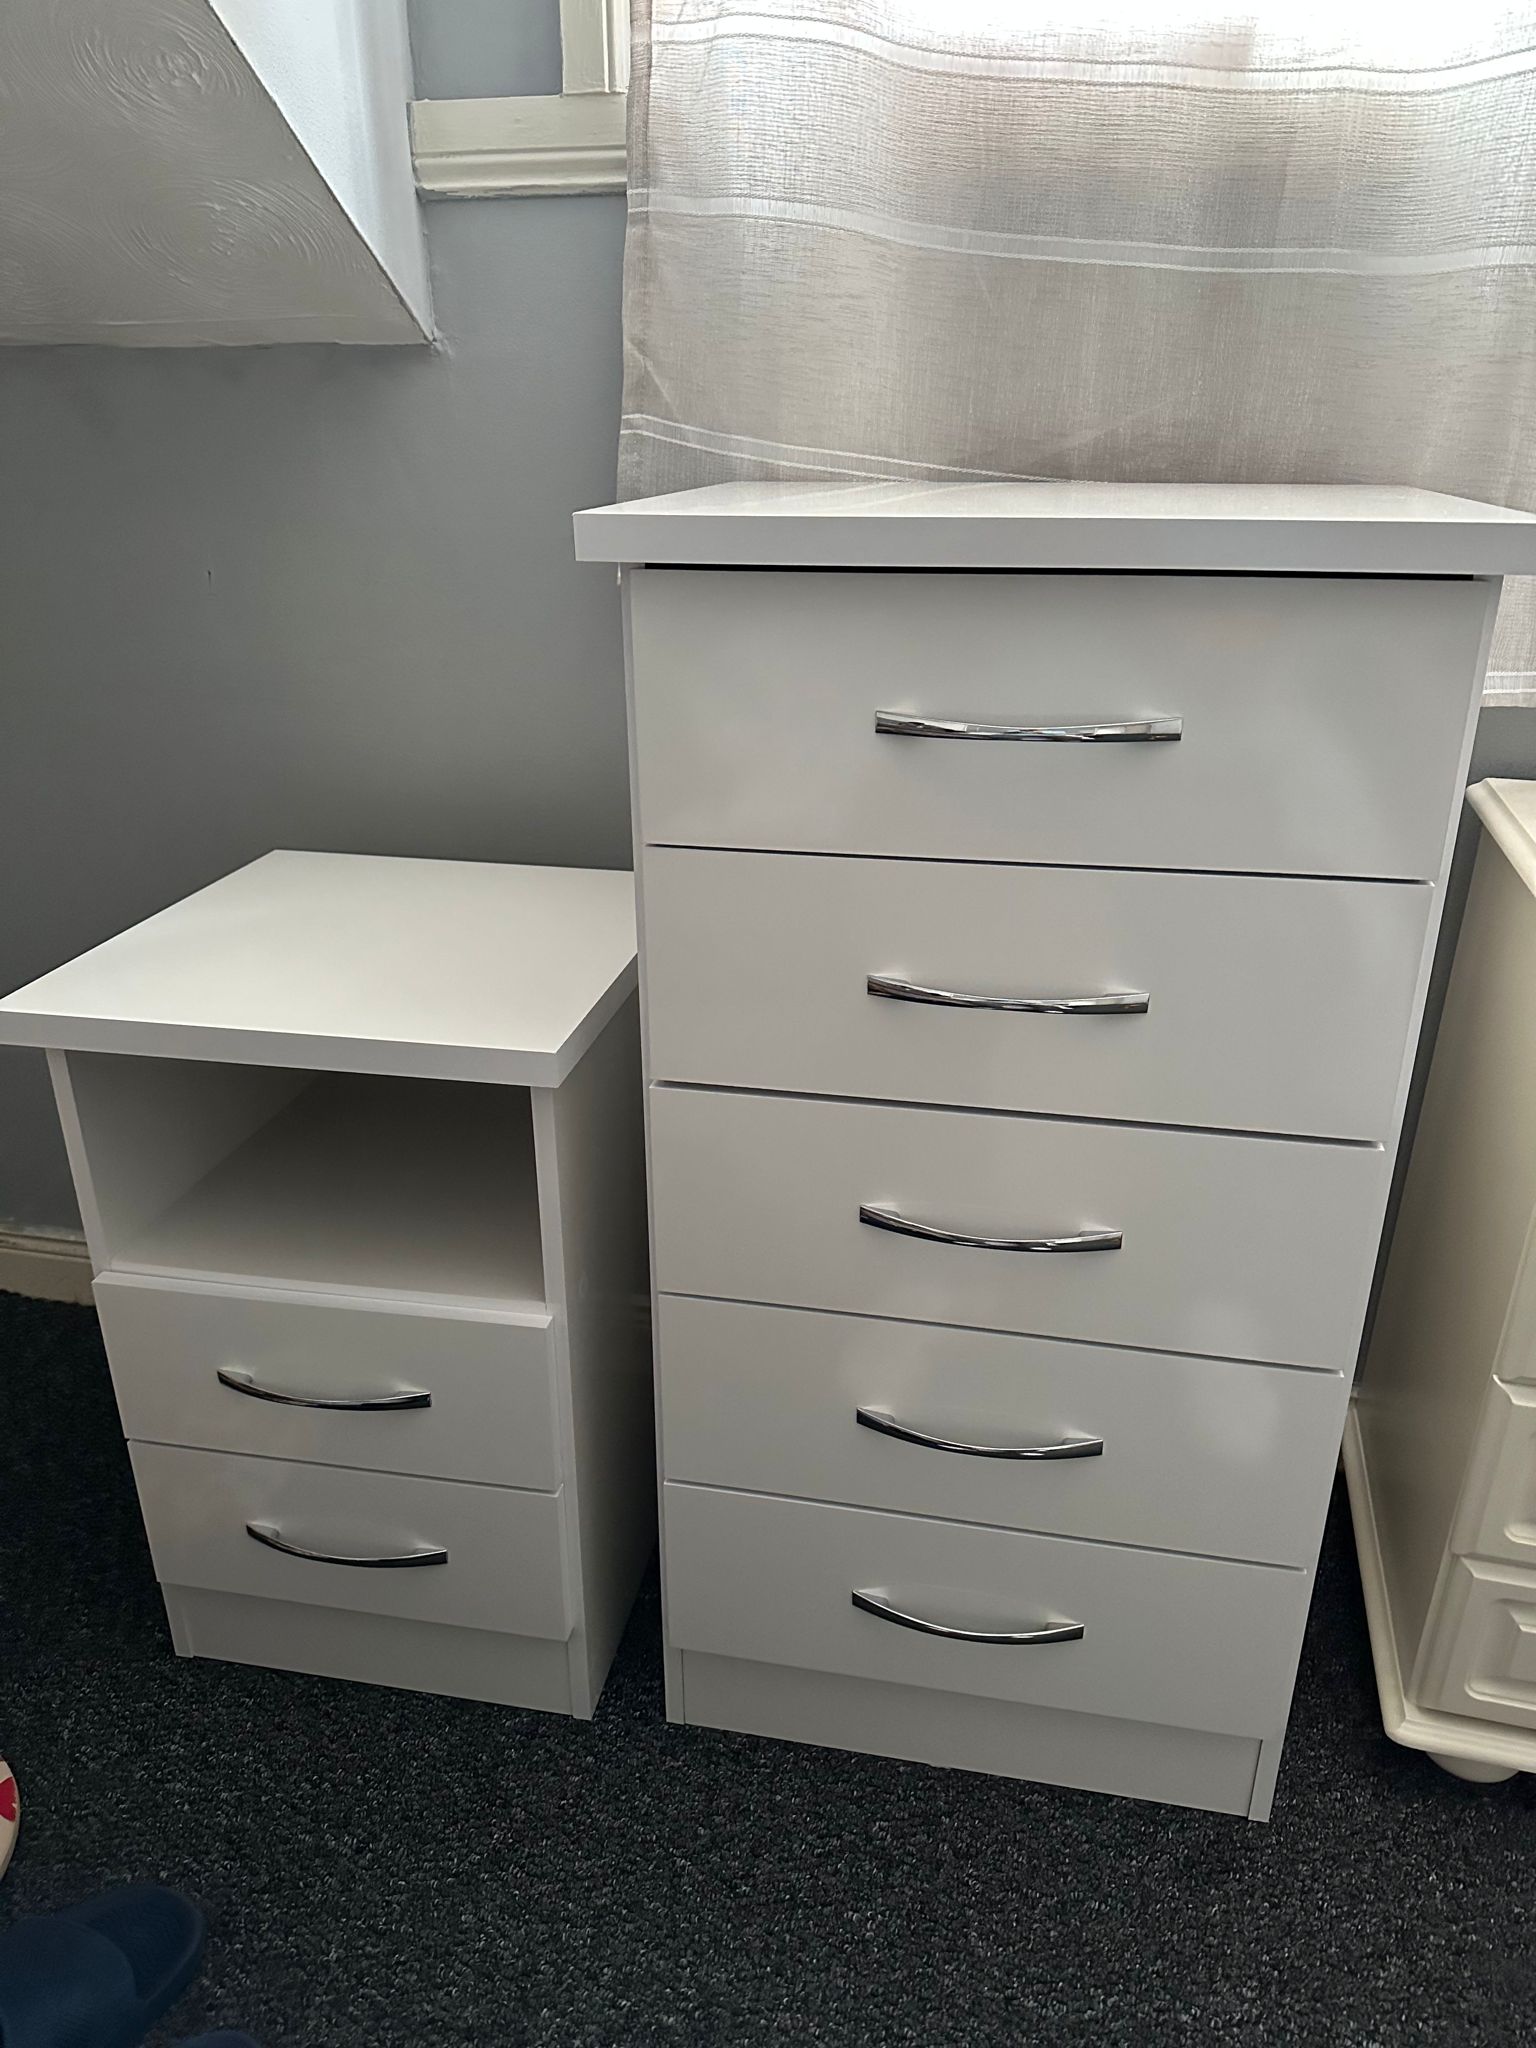 Set of drawers for a bedroom